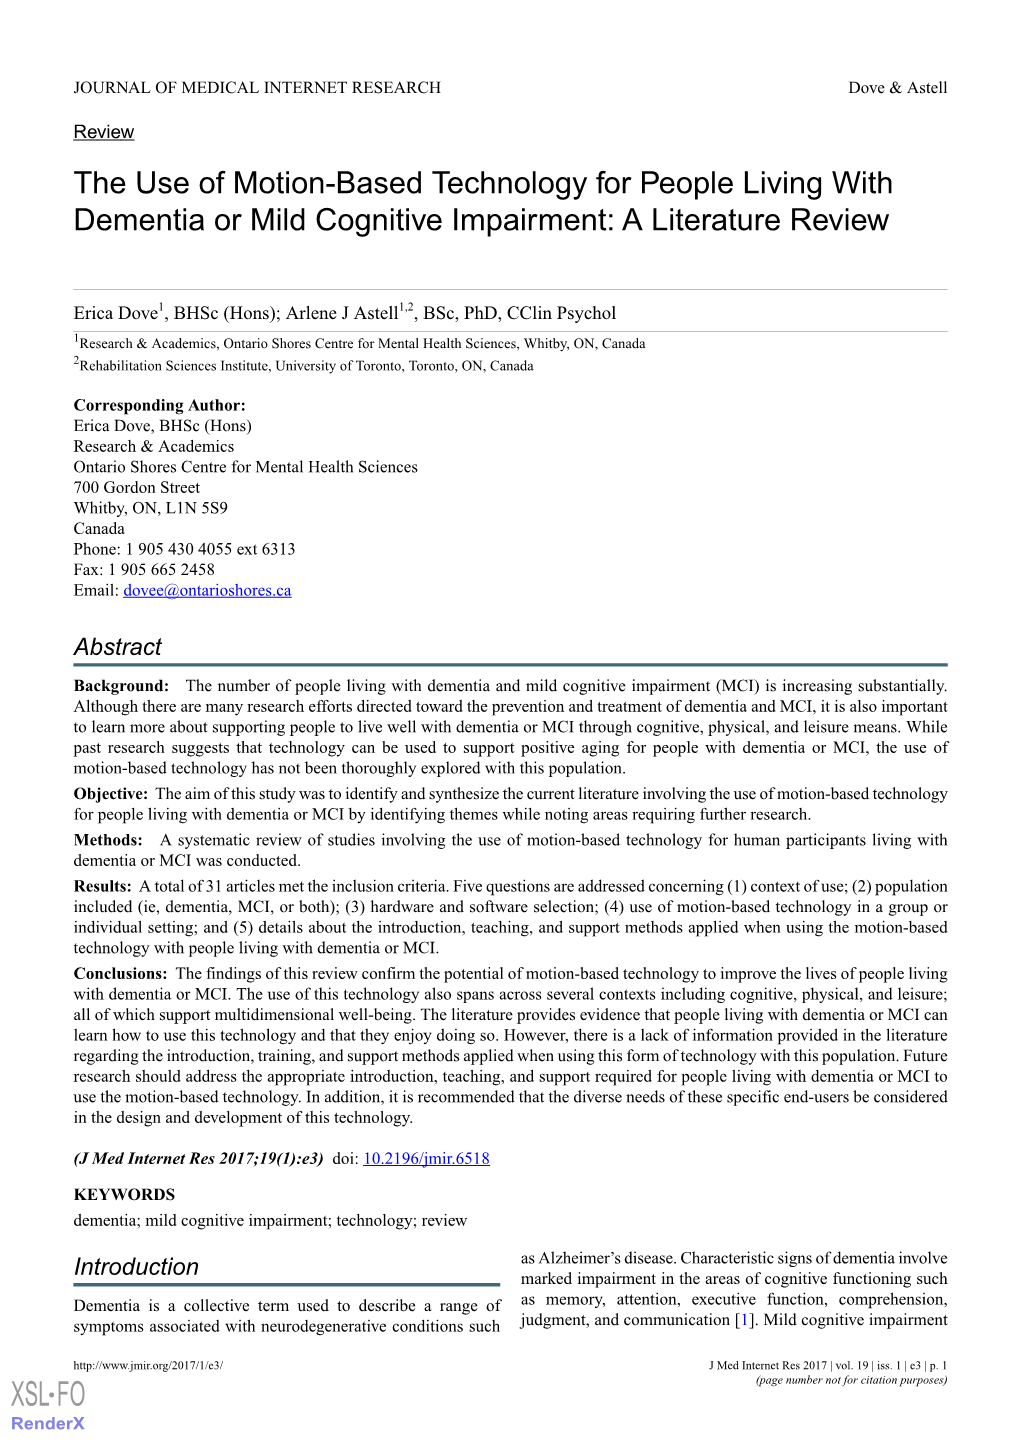 The Use of Motion-Based Technology for People Living with Dementia Or Mild Cognitive Impairment: a Literature Review